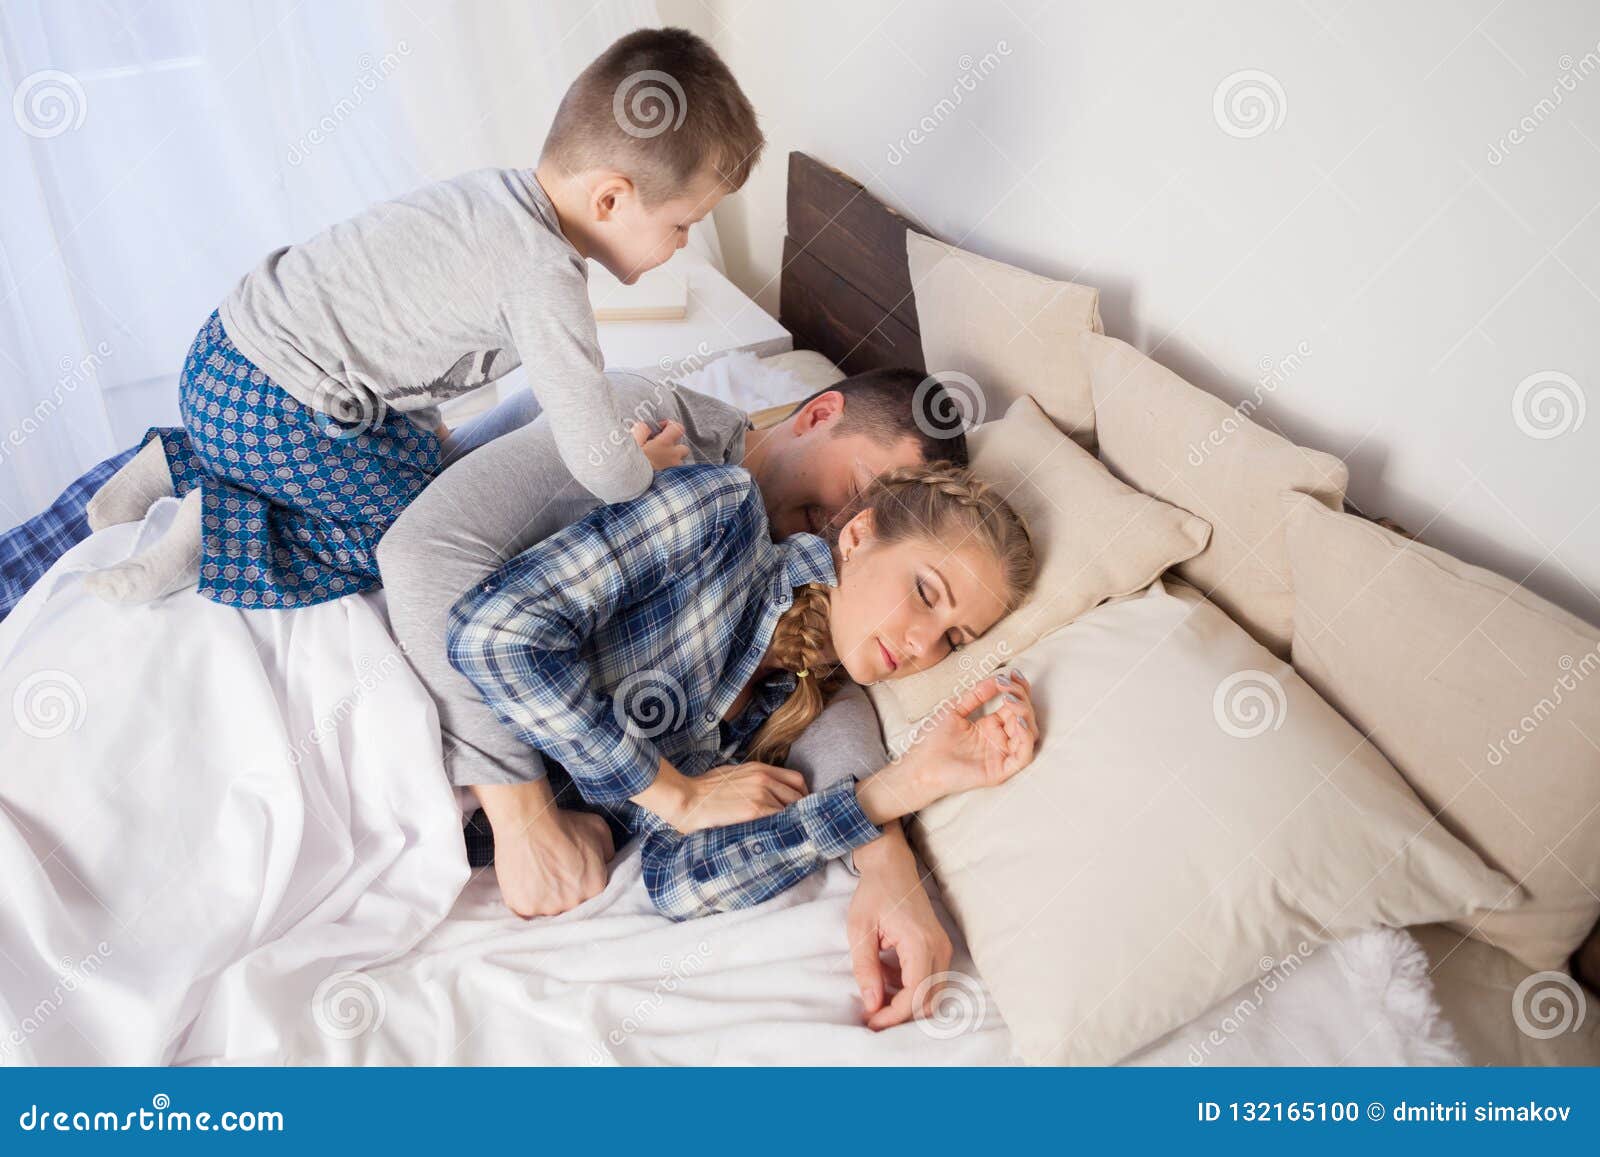 sleeping with dad mom and